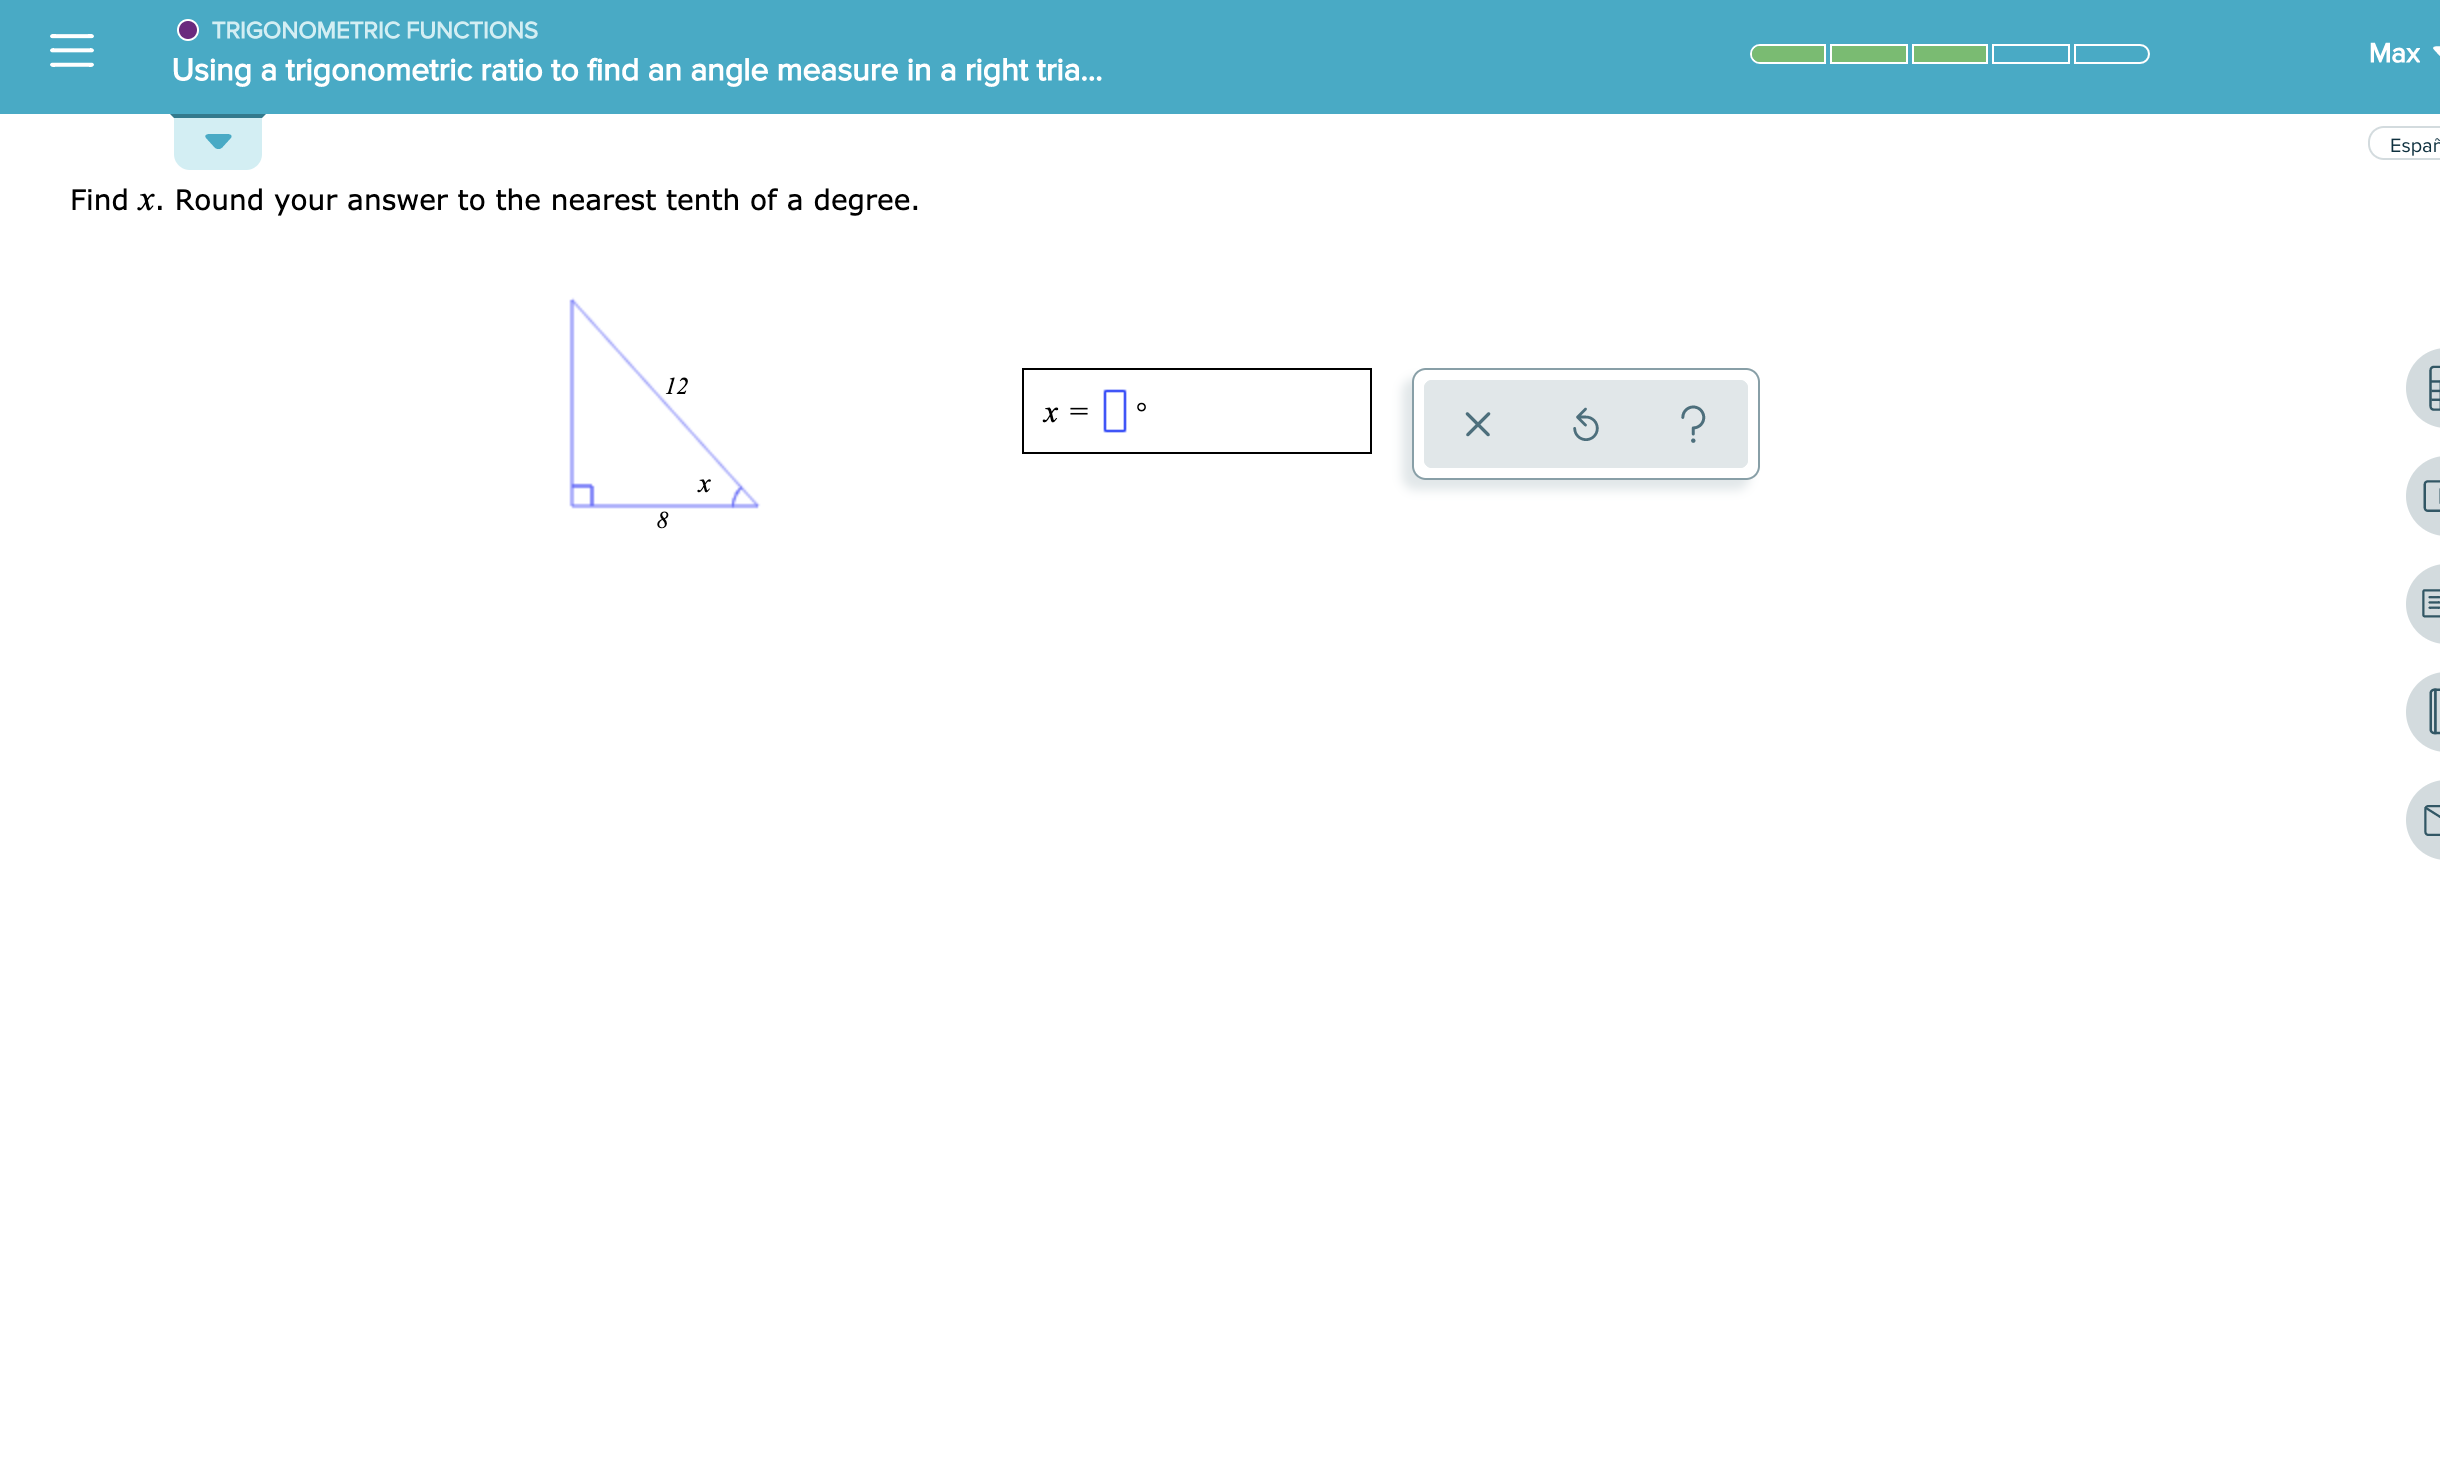 O TRIGONOMETRIC FUNCTIONS
Max
Using a trigonometric ratio to find an angle measure in a right tria...
Espar
Find x. Round your answer to the nearest tenth of a degree.
12
C
?
х%—
X
х
U
